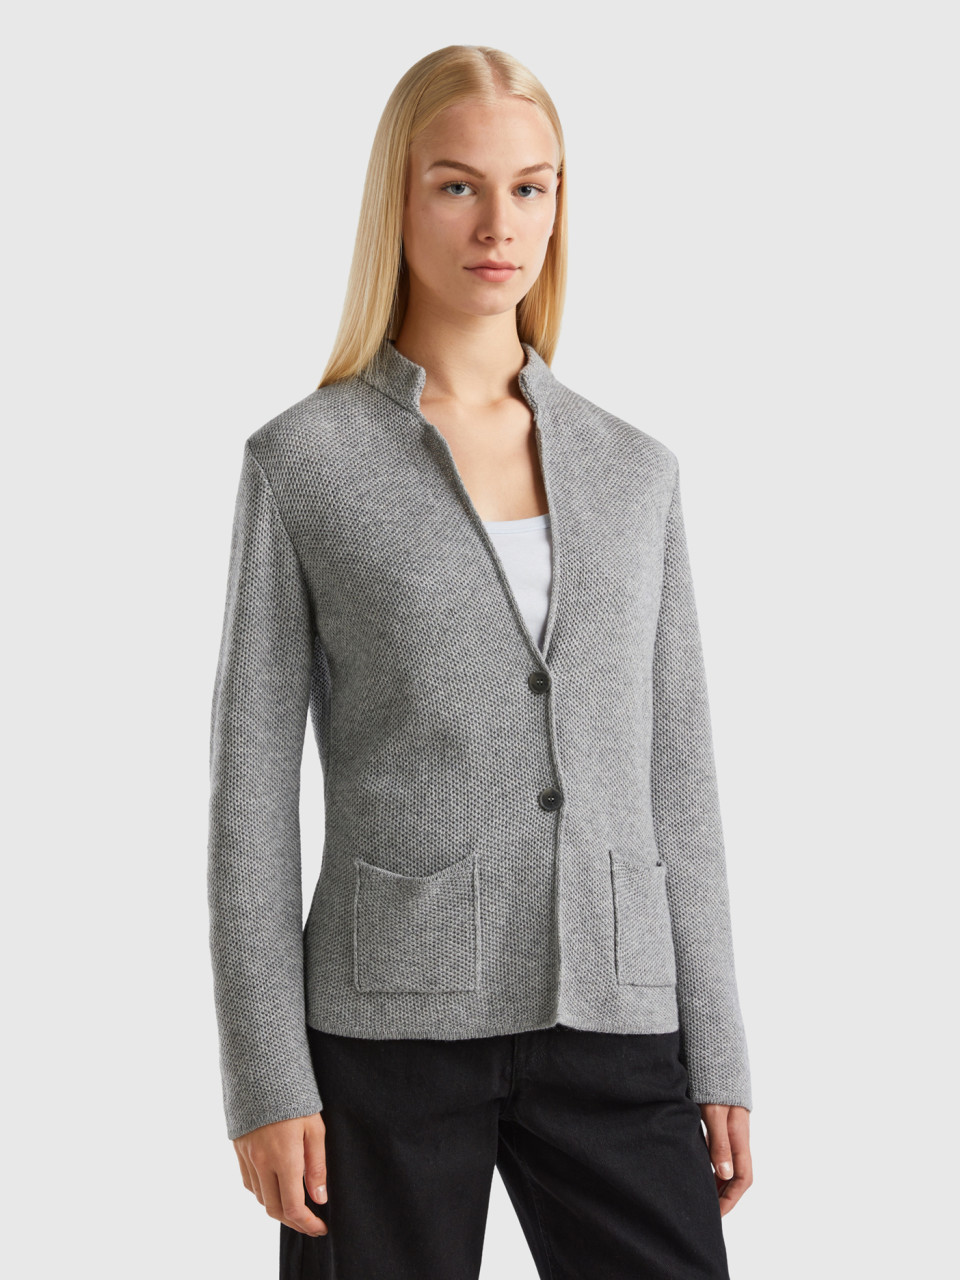 Benetton, Knit Jacket In Wool And Cashmere Blend, Gray, Women